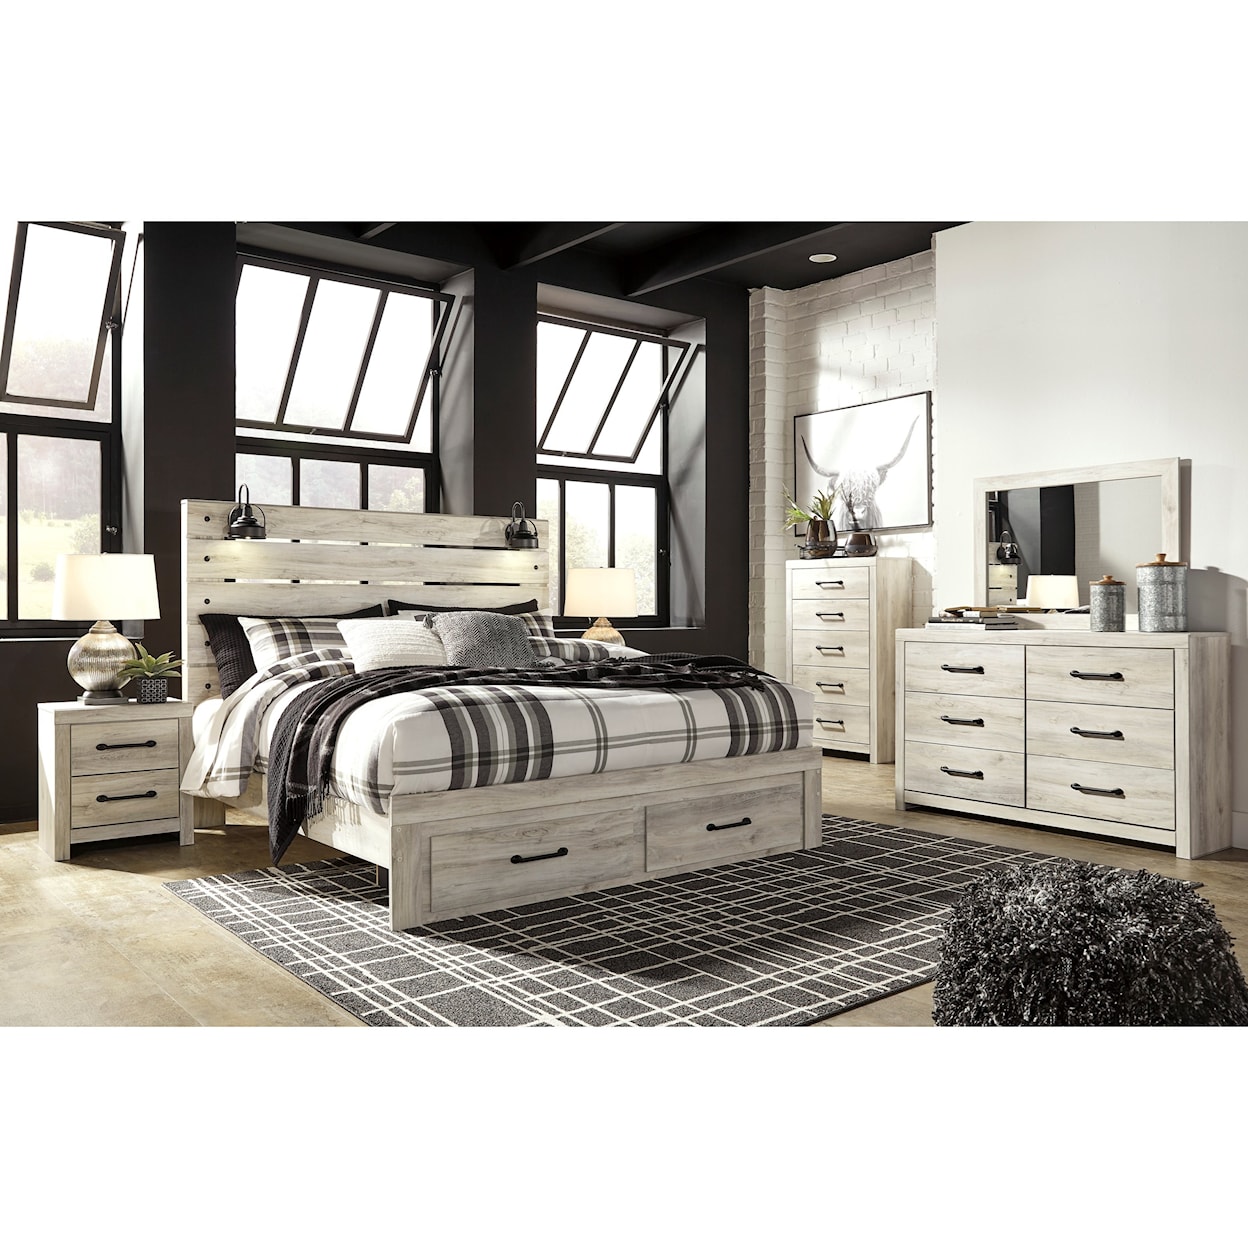 Signature Design by Ashley Cambeck King Bedroom Group